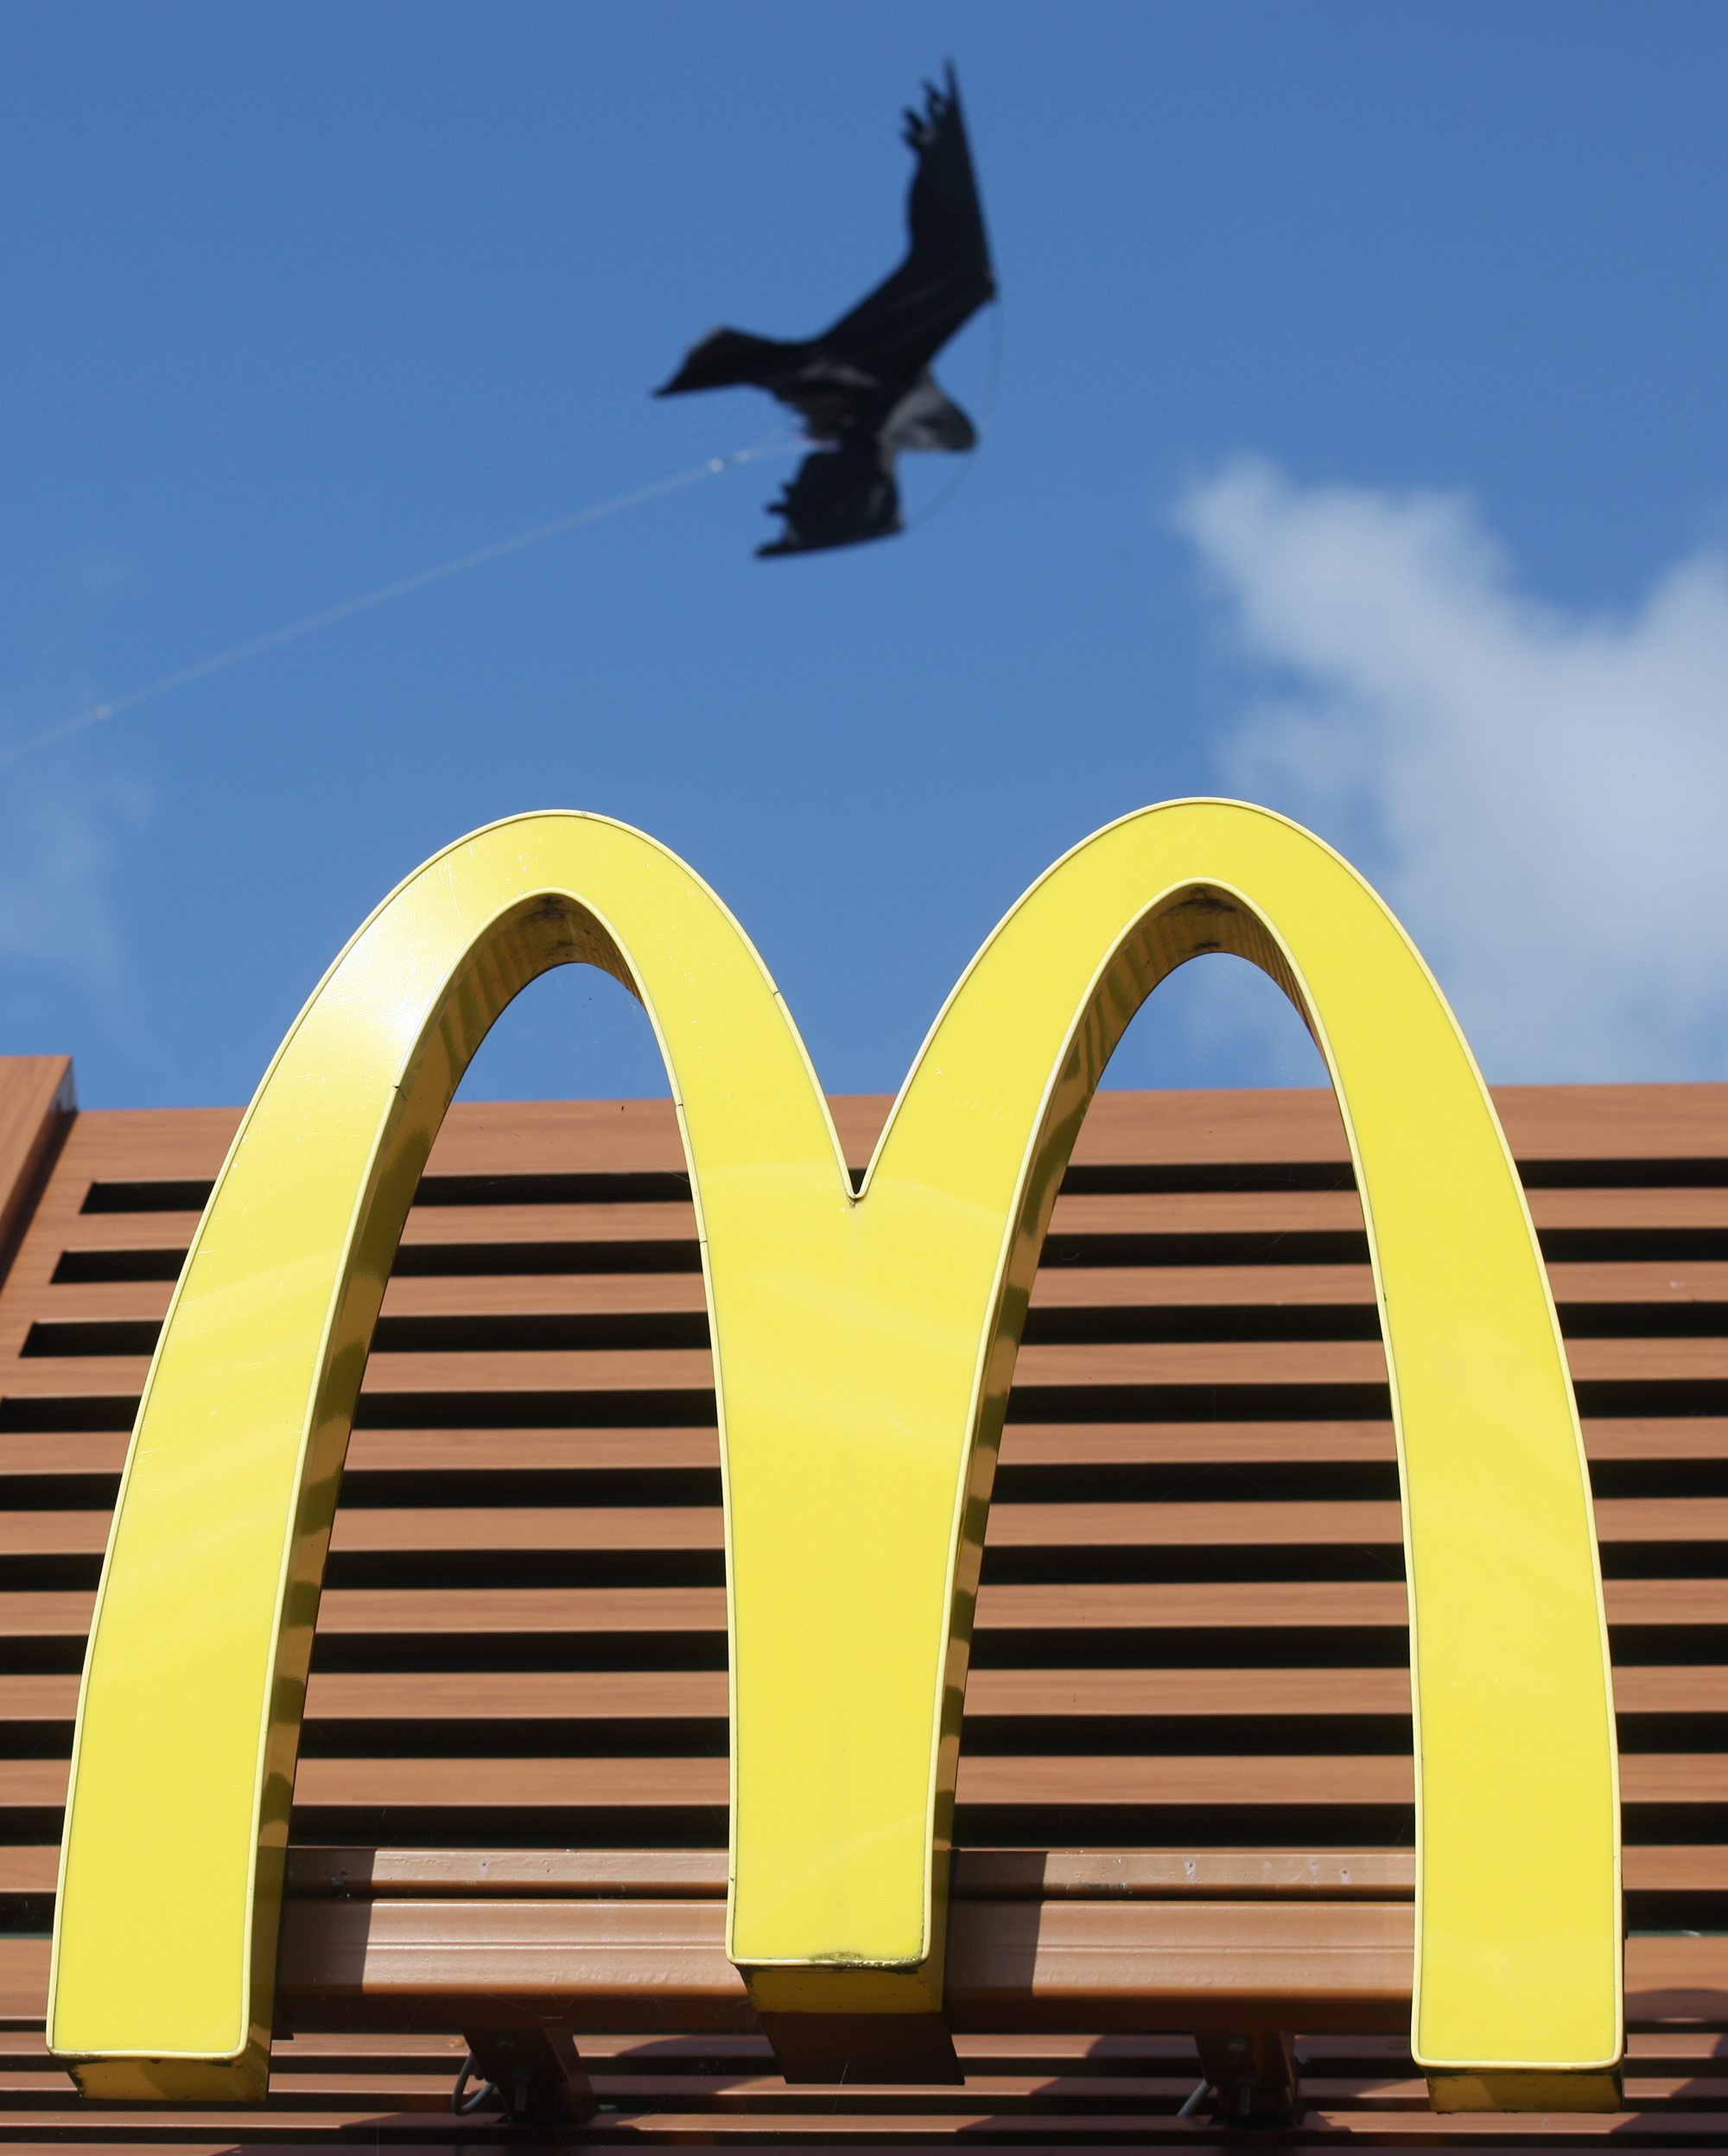 One of the fake hawks soars above the famous golden arches at Westwood